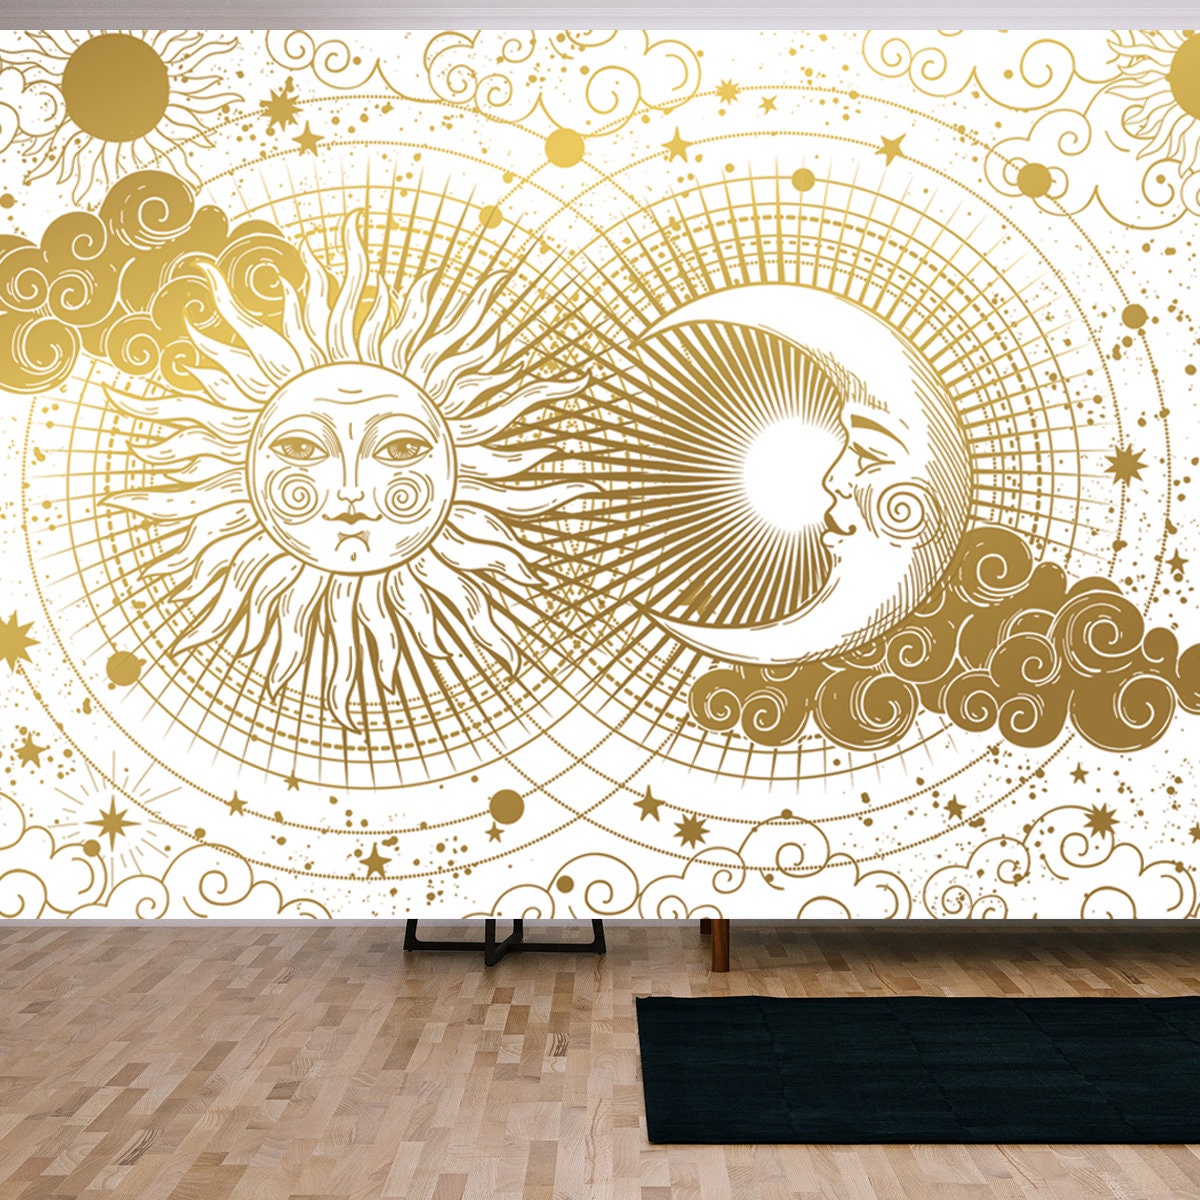 Magic Banner for Astrology, Boho Design. The Universe, Golden Crescent, Sun, and Clouds on a White Background Wallpaper Living Room Mural